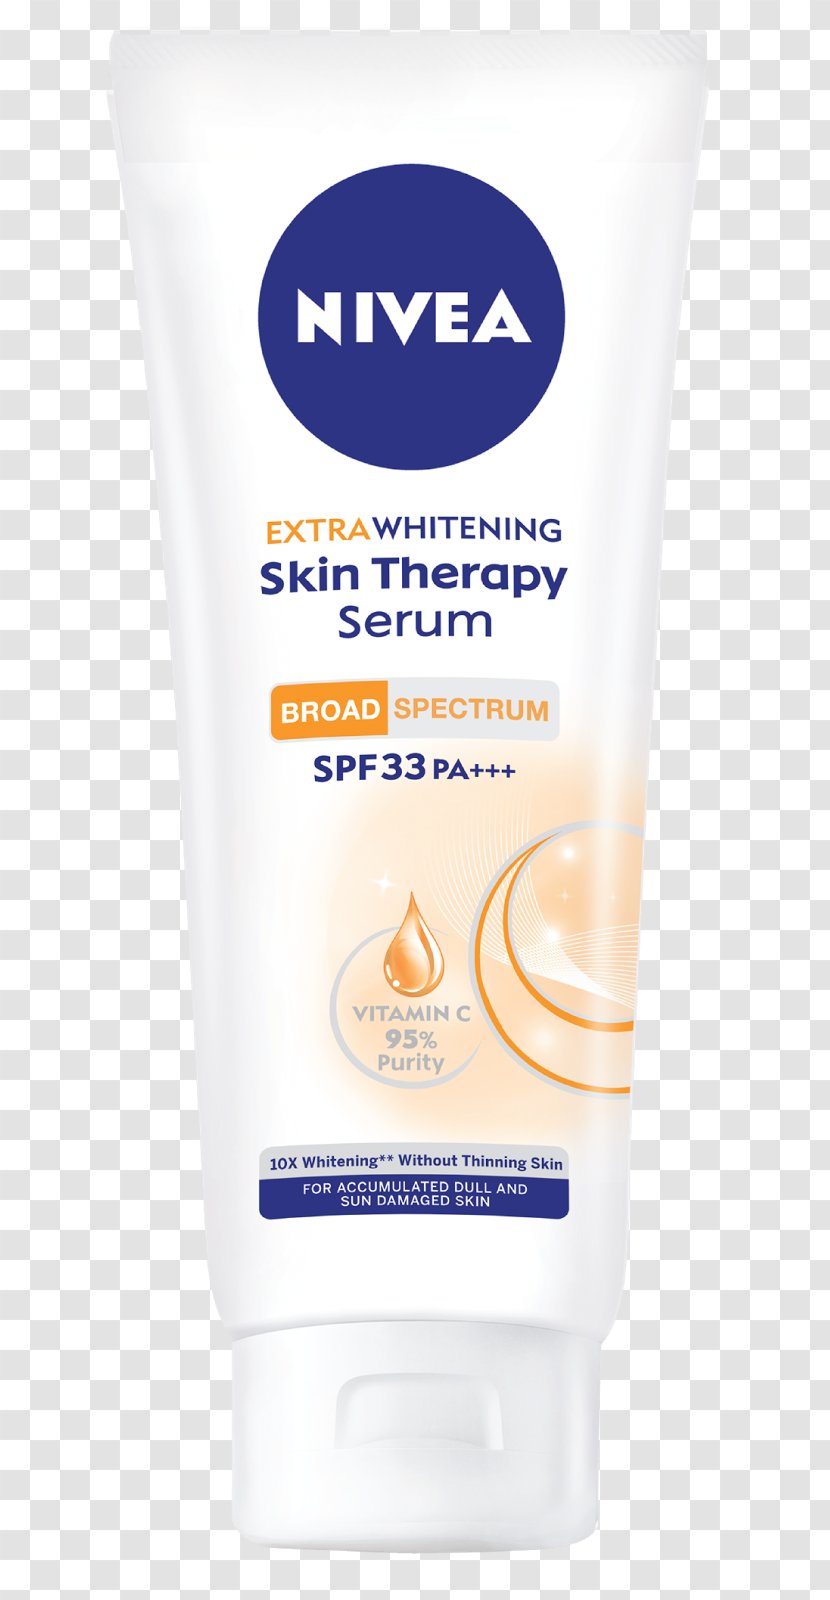 NIVEA Skin Firming Hydration Body Lotion Cream Sunscreen - Personal Care - Whitening Transparent PNG